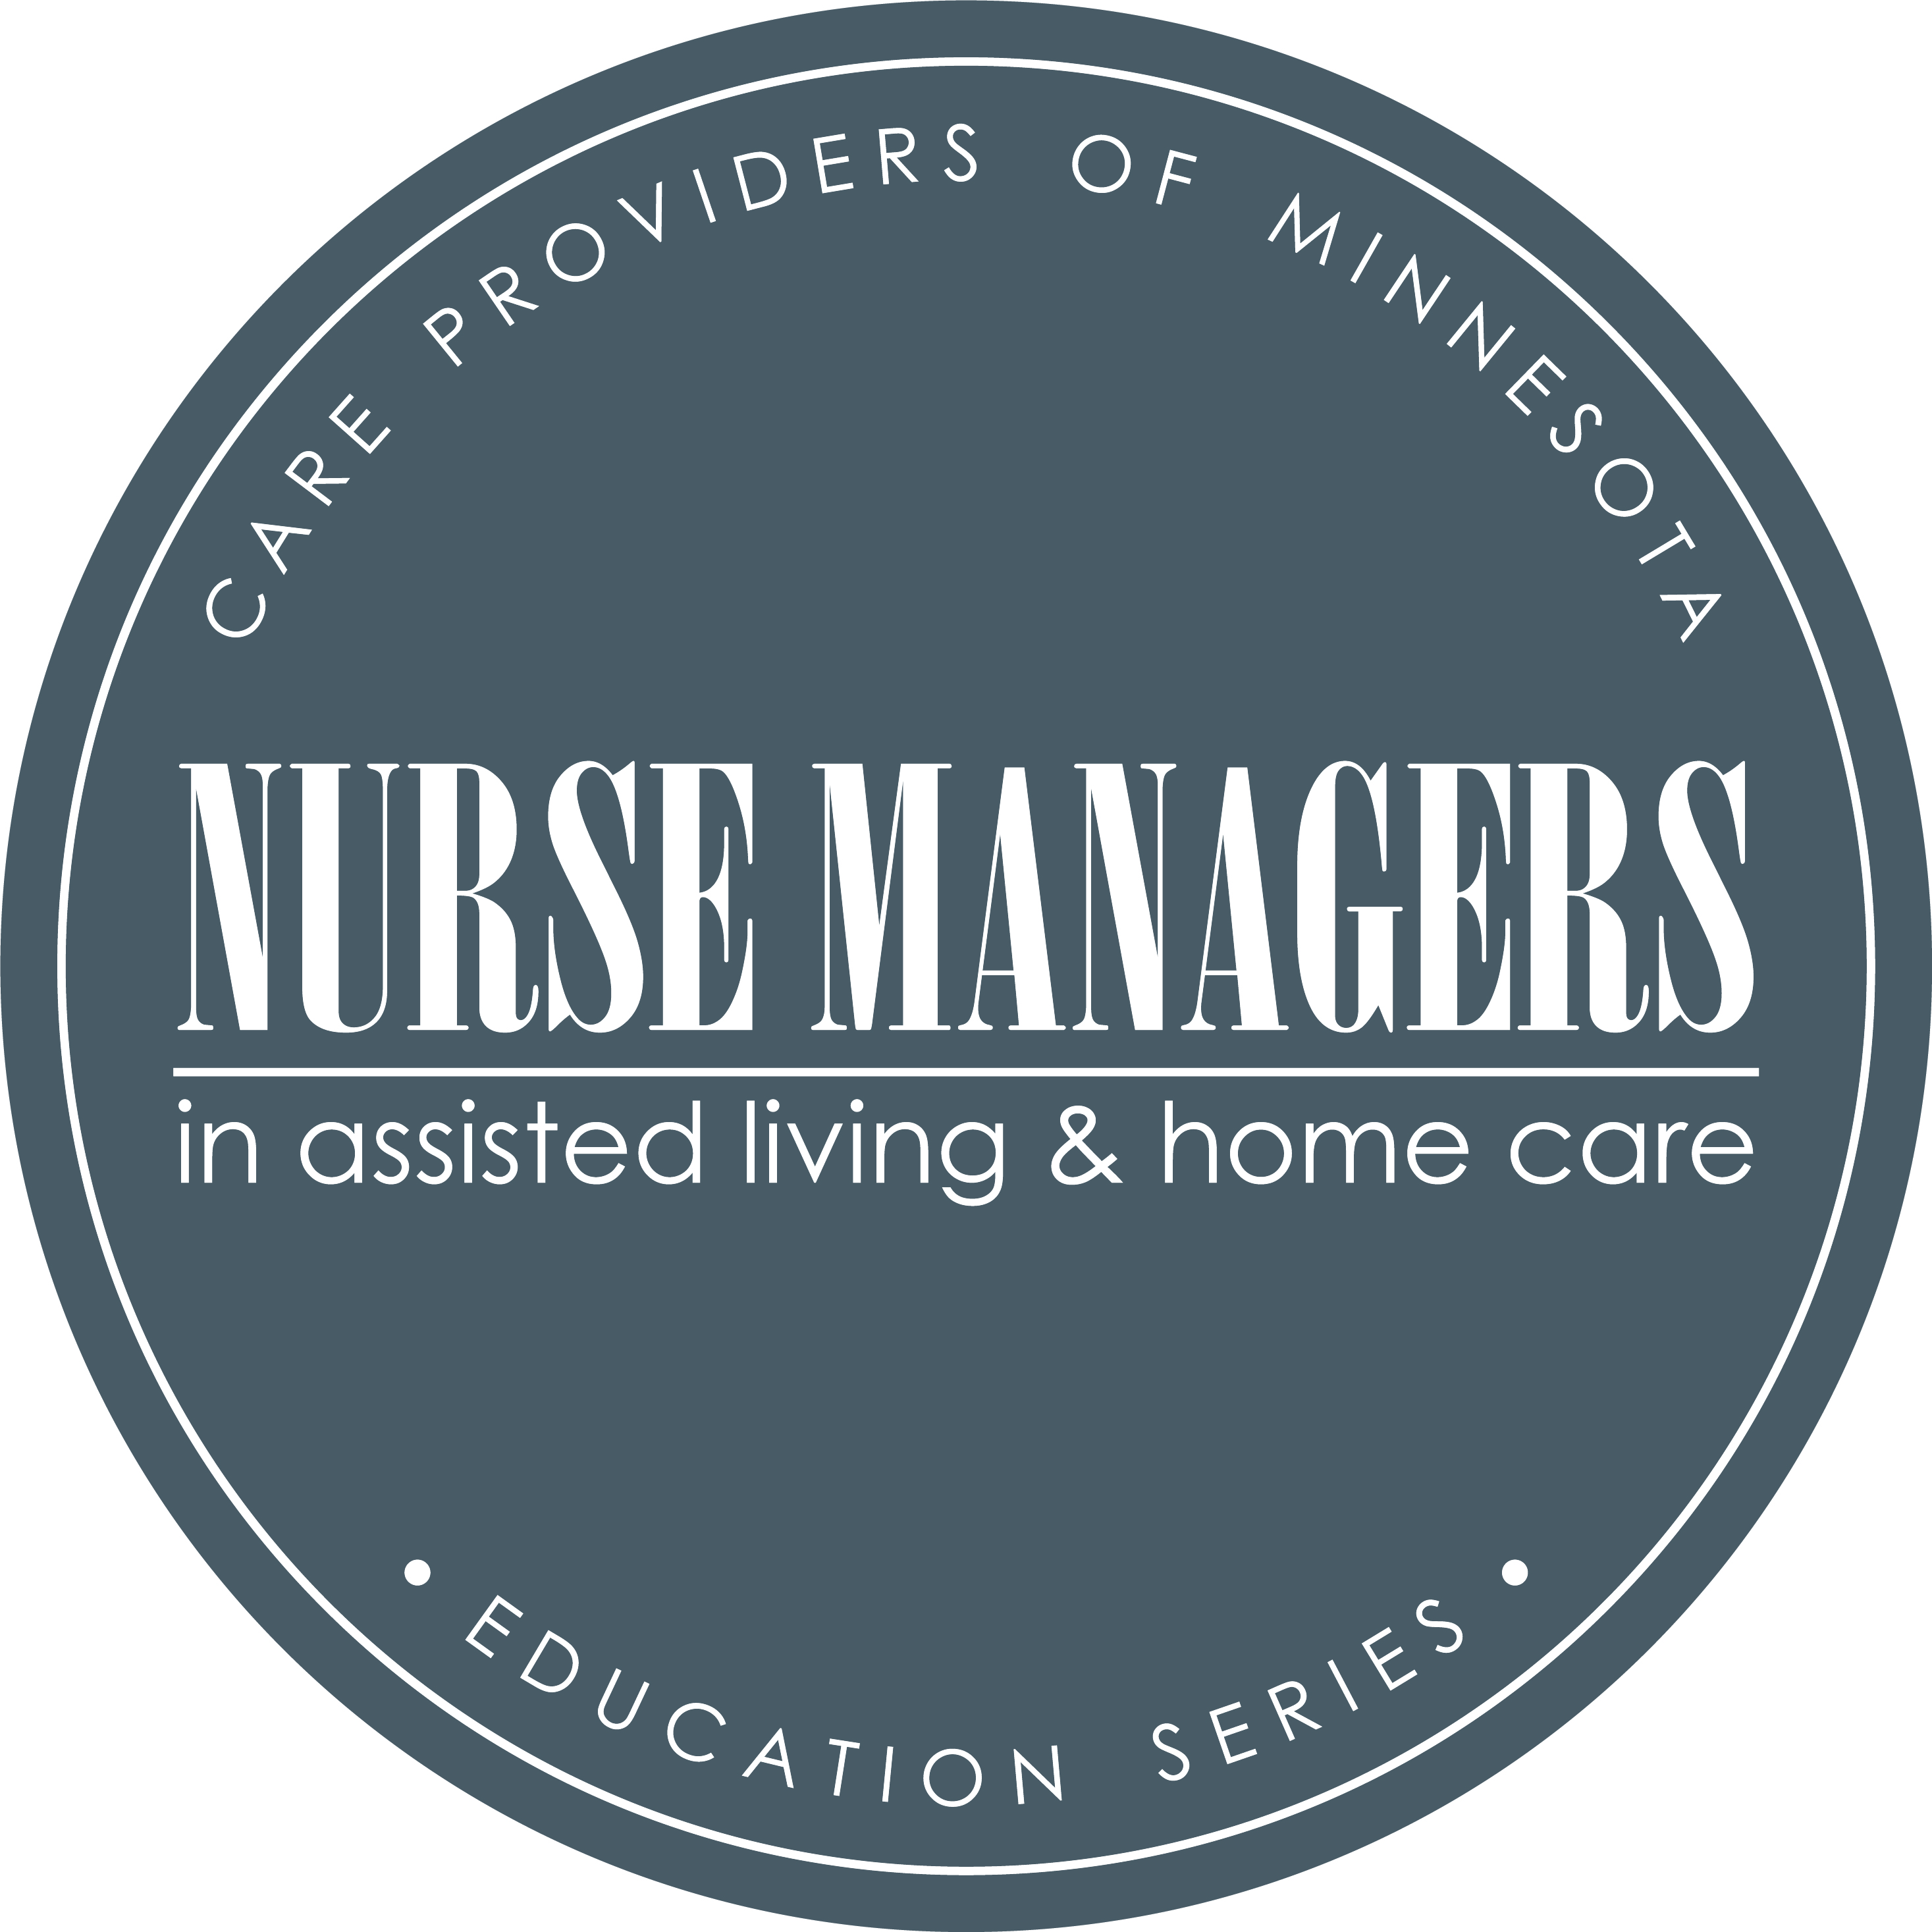 Nurse Managers in Assisted Living & Home Care